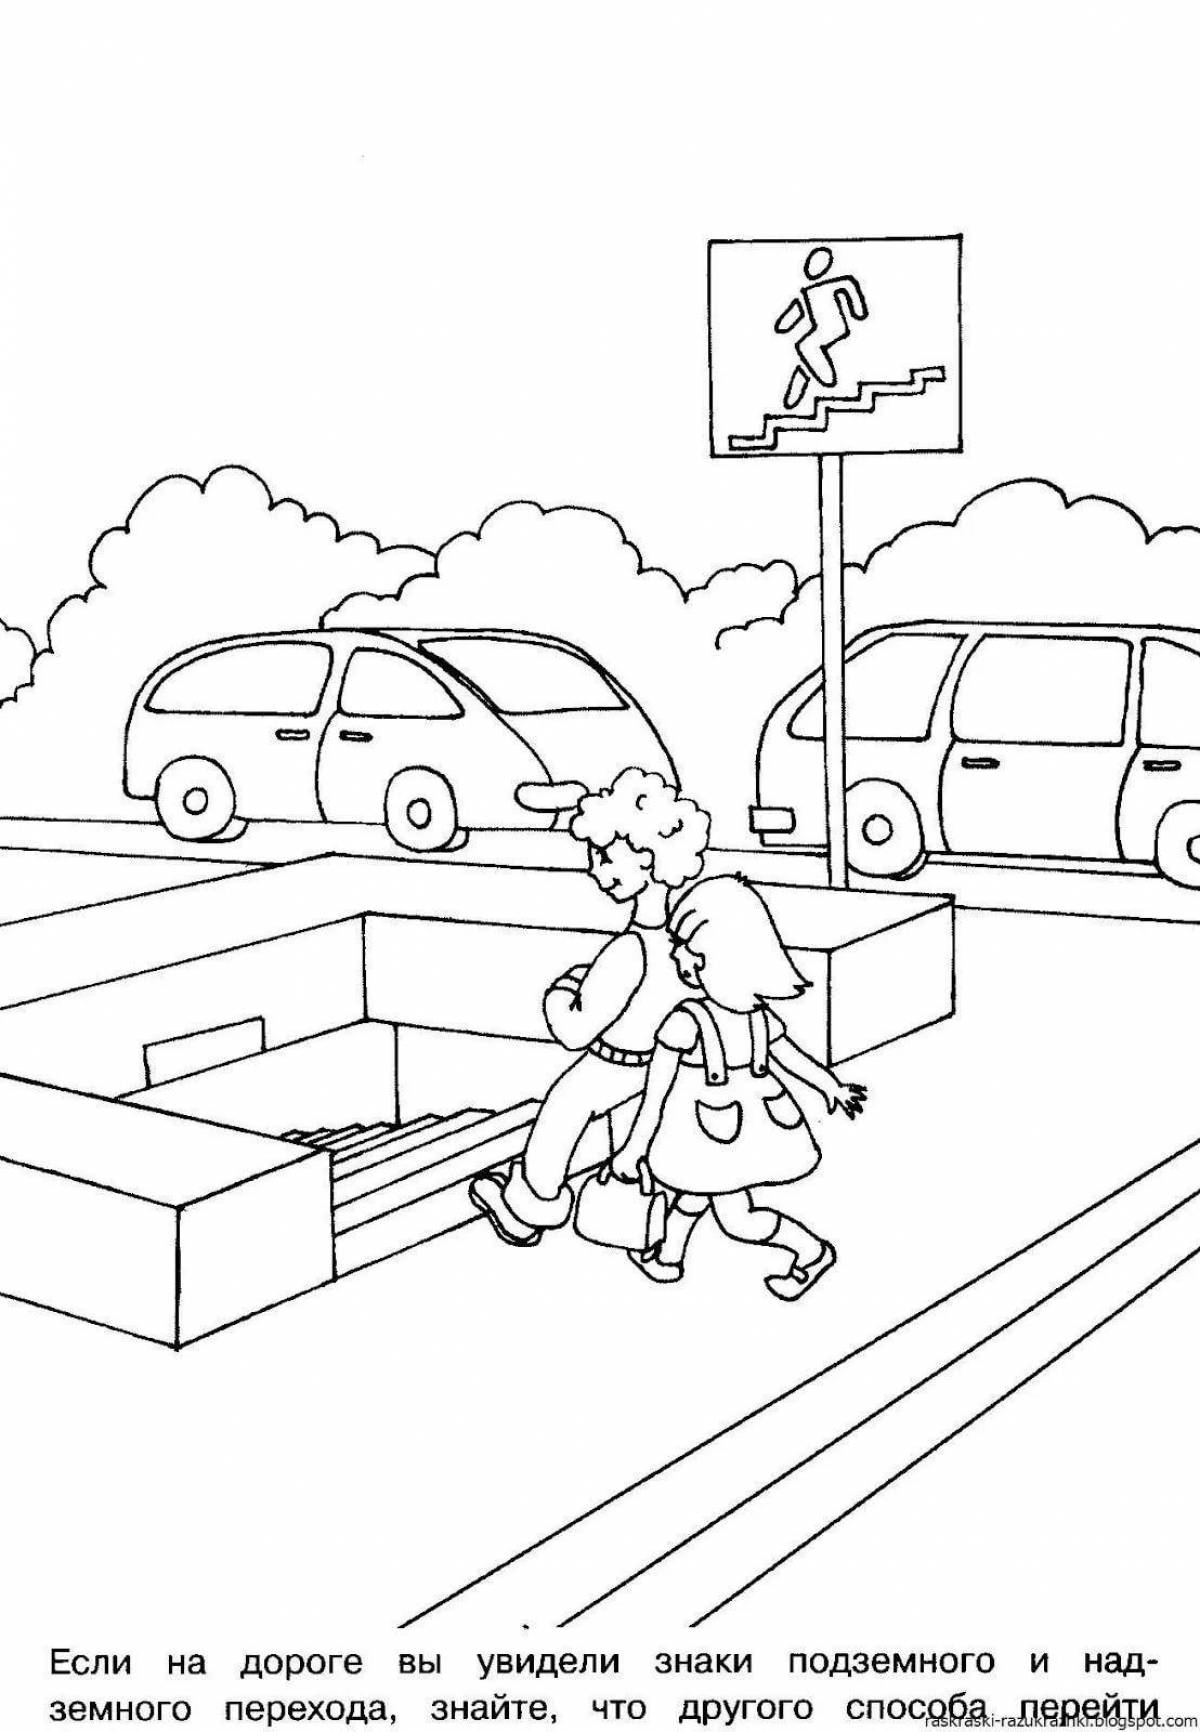 Bright safe road coloring page